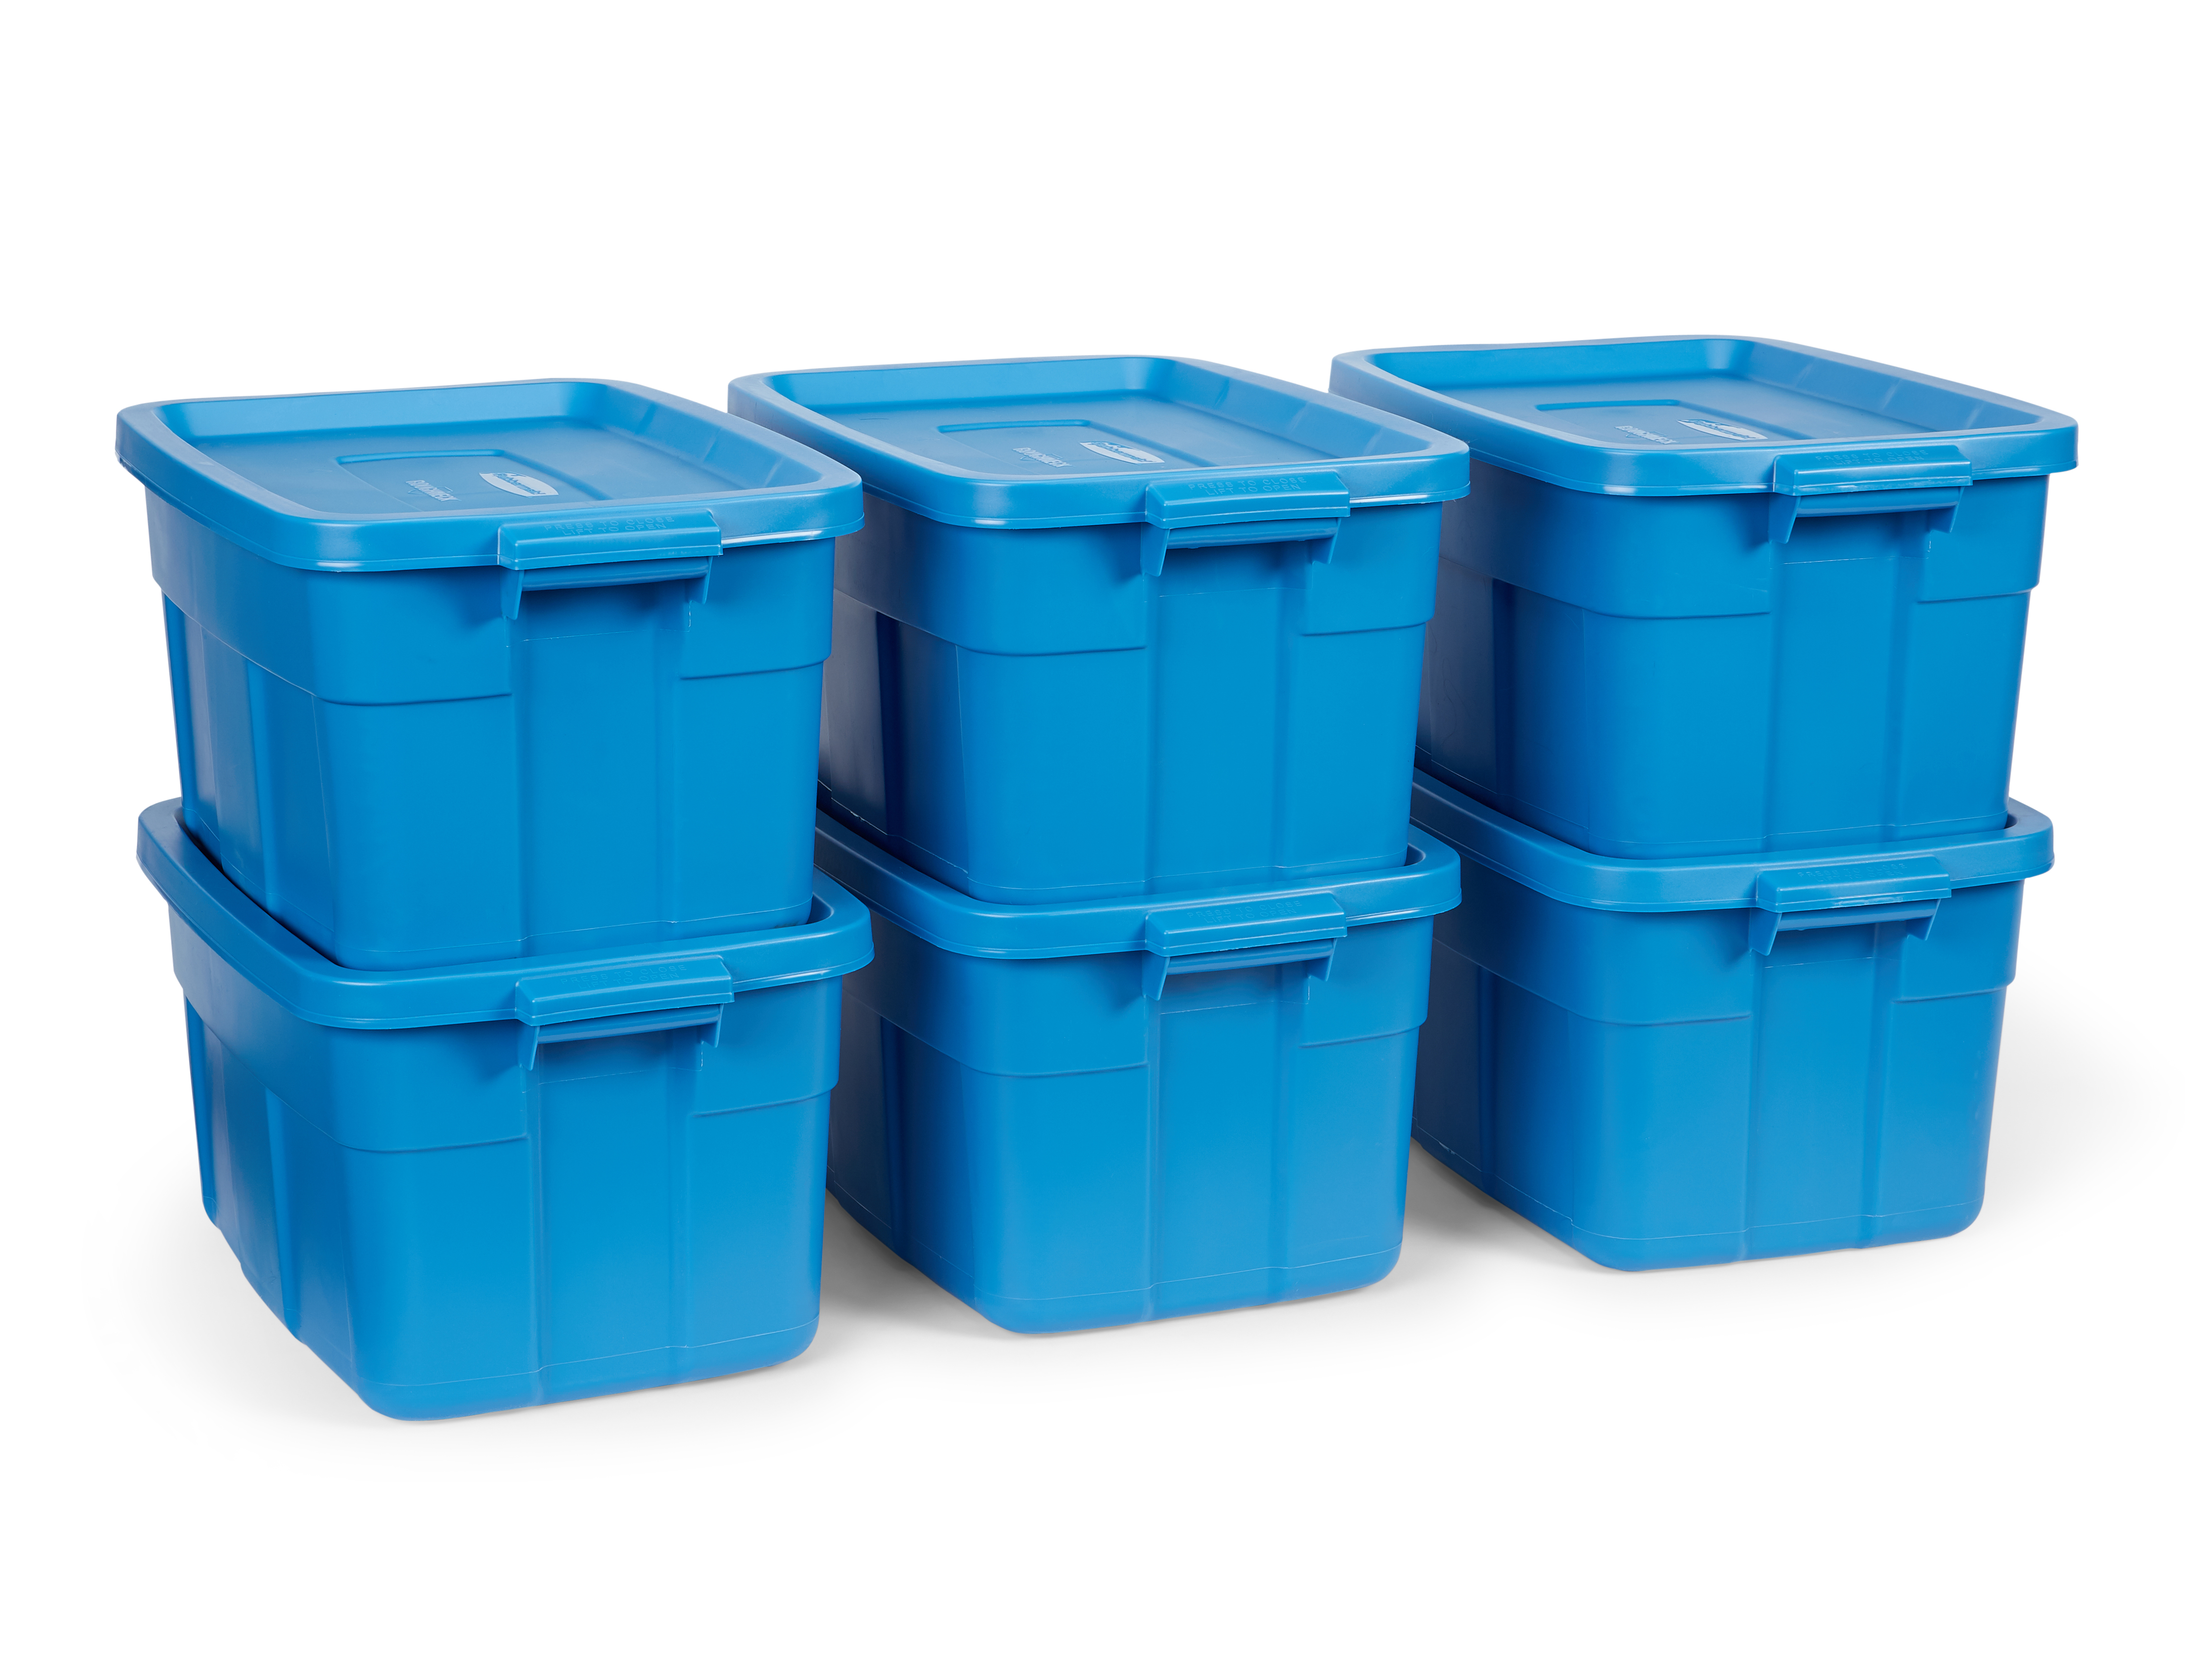 Rubbermaid Roughneck Tote 14 Gal Storage Container, Heritage Blue (6 Pack) - image 1 of 5